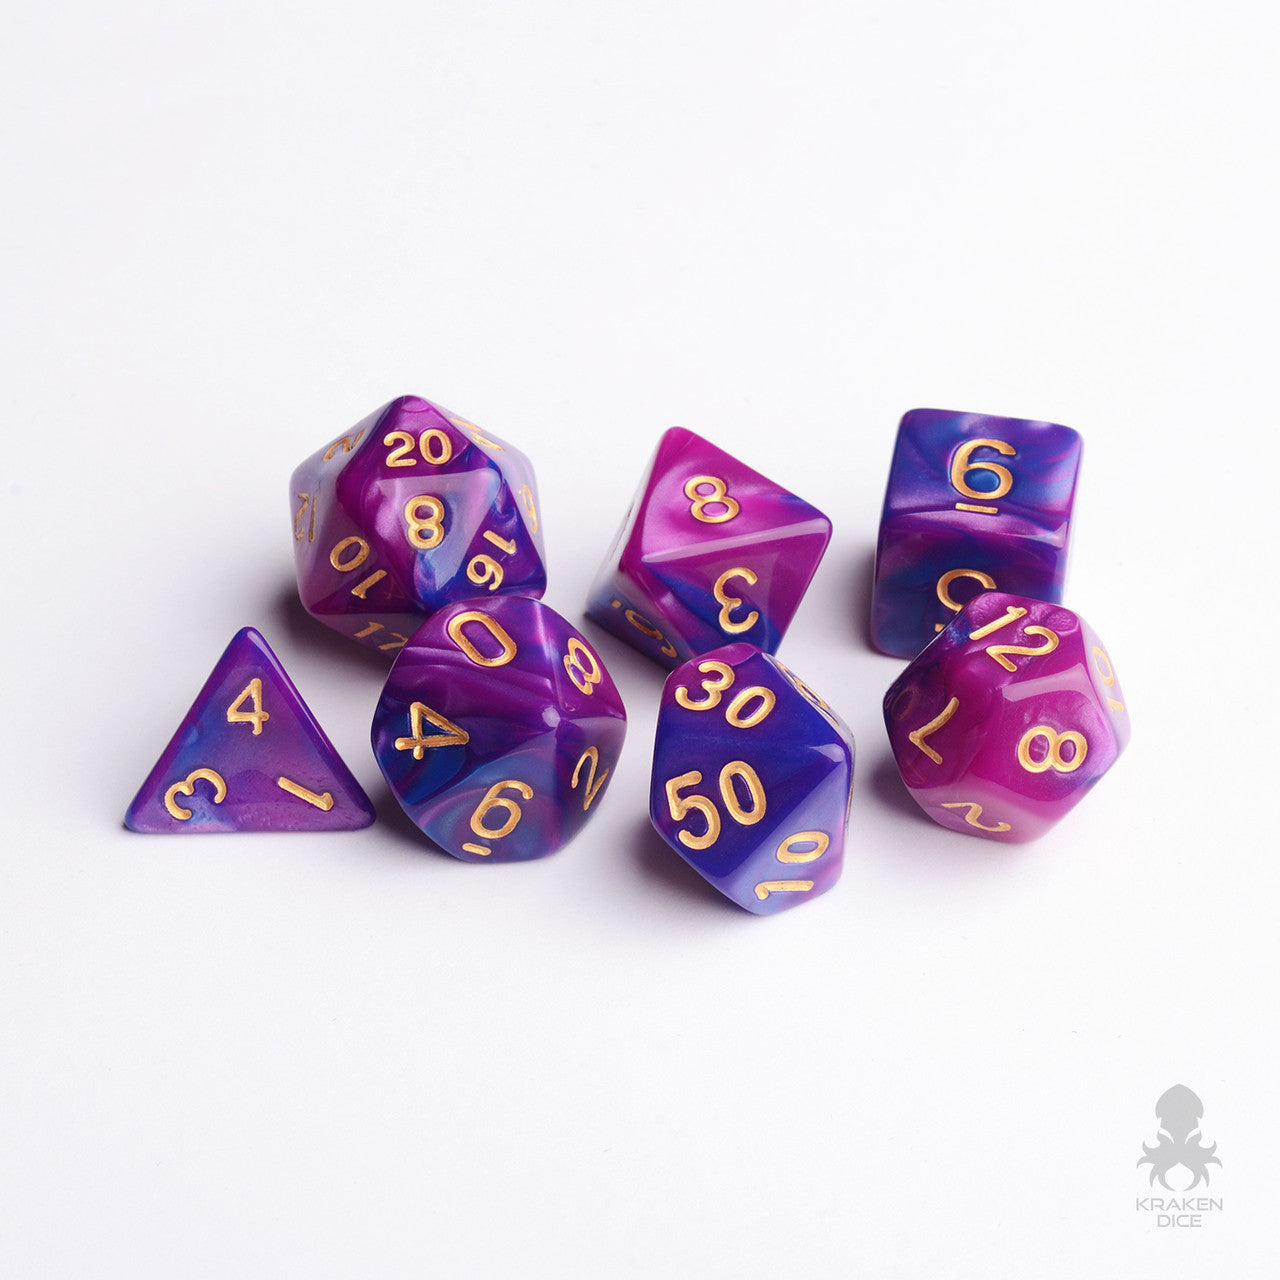 Royal Passion  RPG Dice Set for Dungeons and Dragons